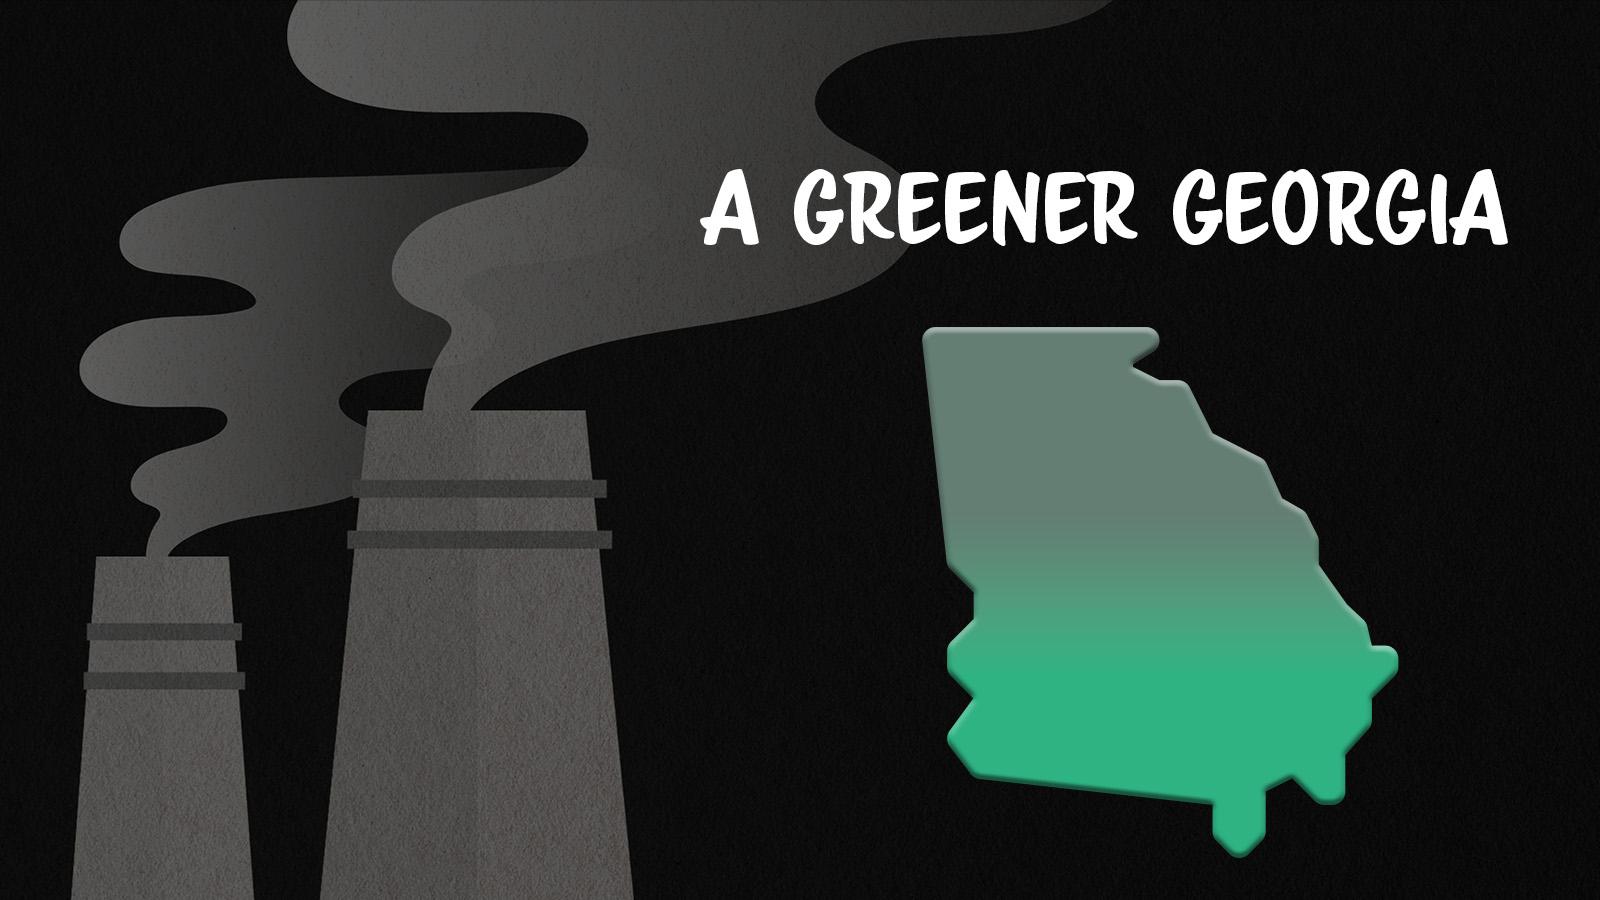 A graphic showing industrial smokestacks juxtaposed with the outline of the state of Georgia colored in green.